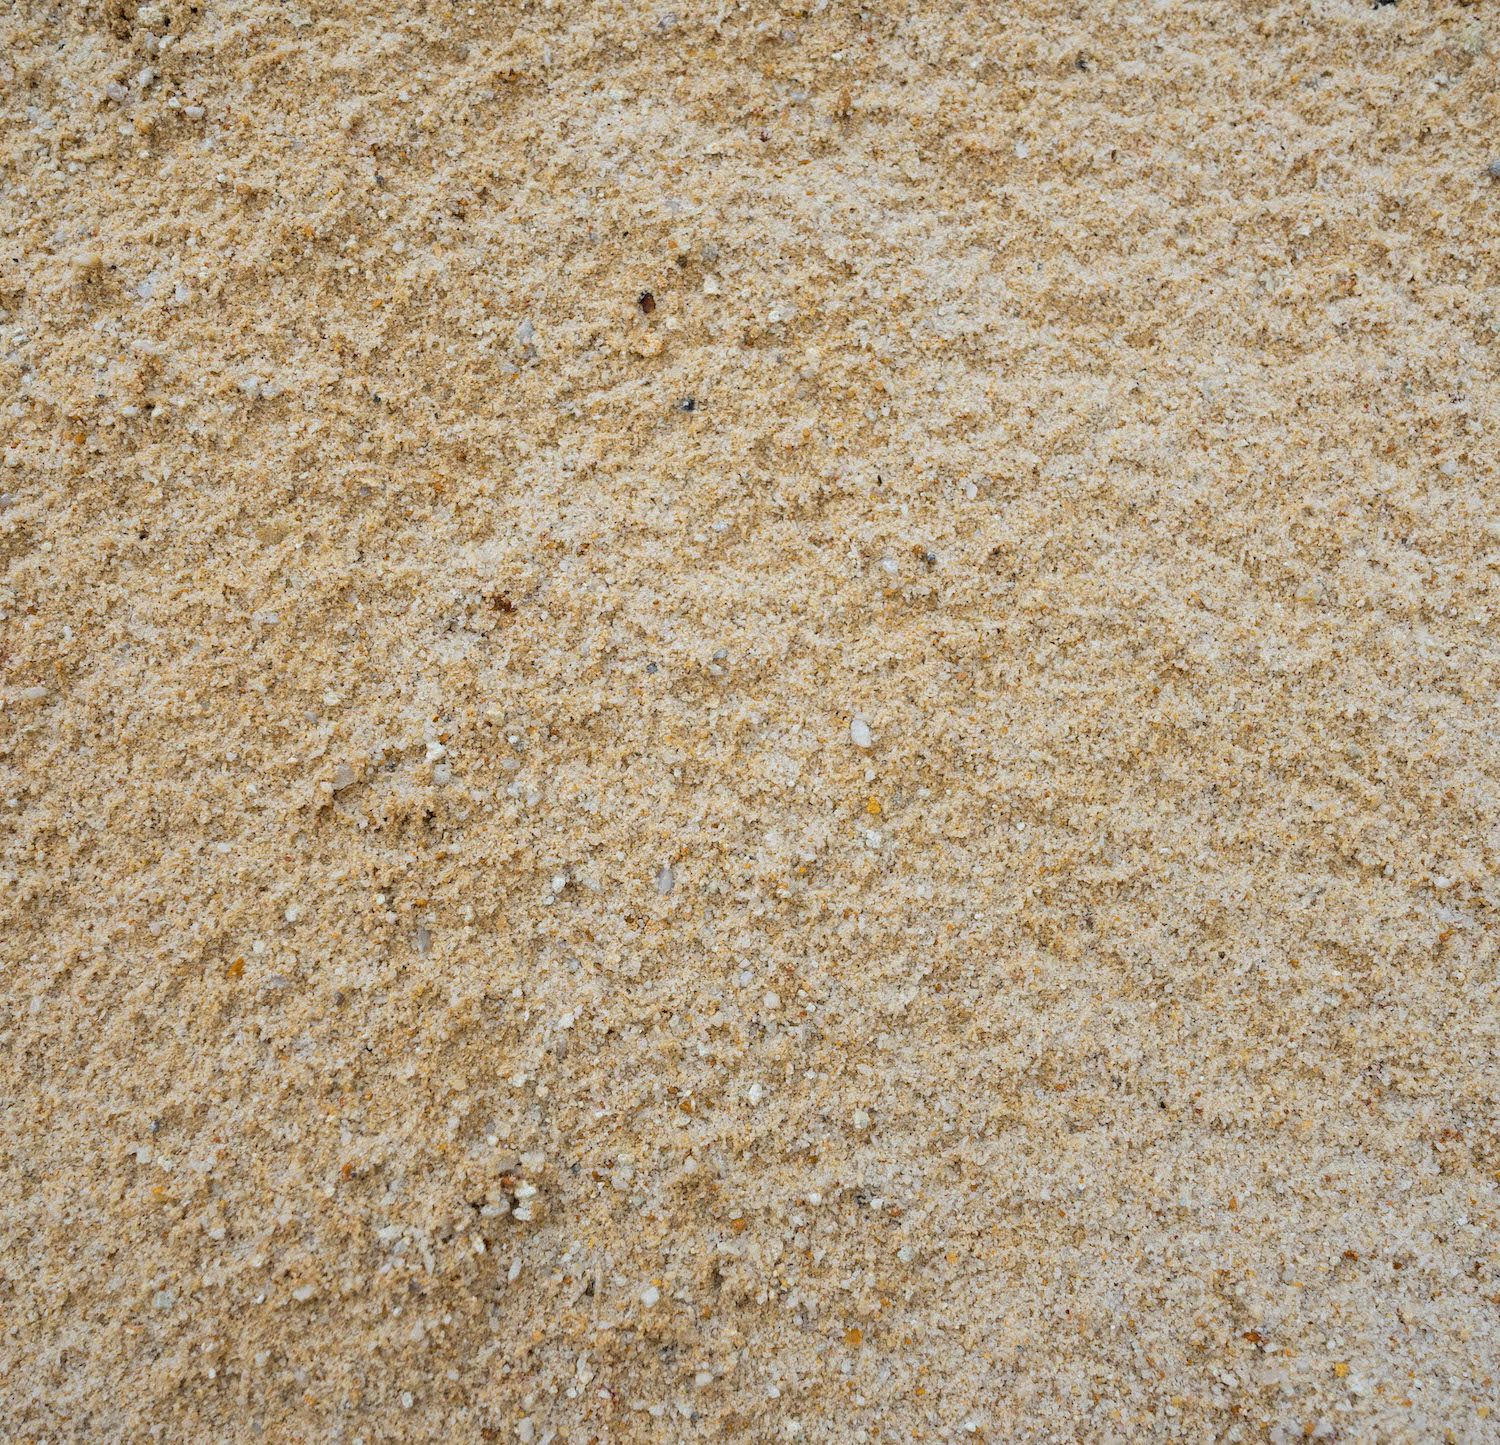 Product Image Test - Natural Stone & Mulch